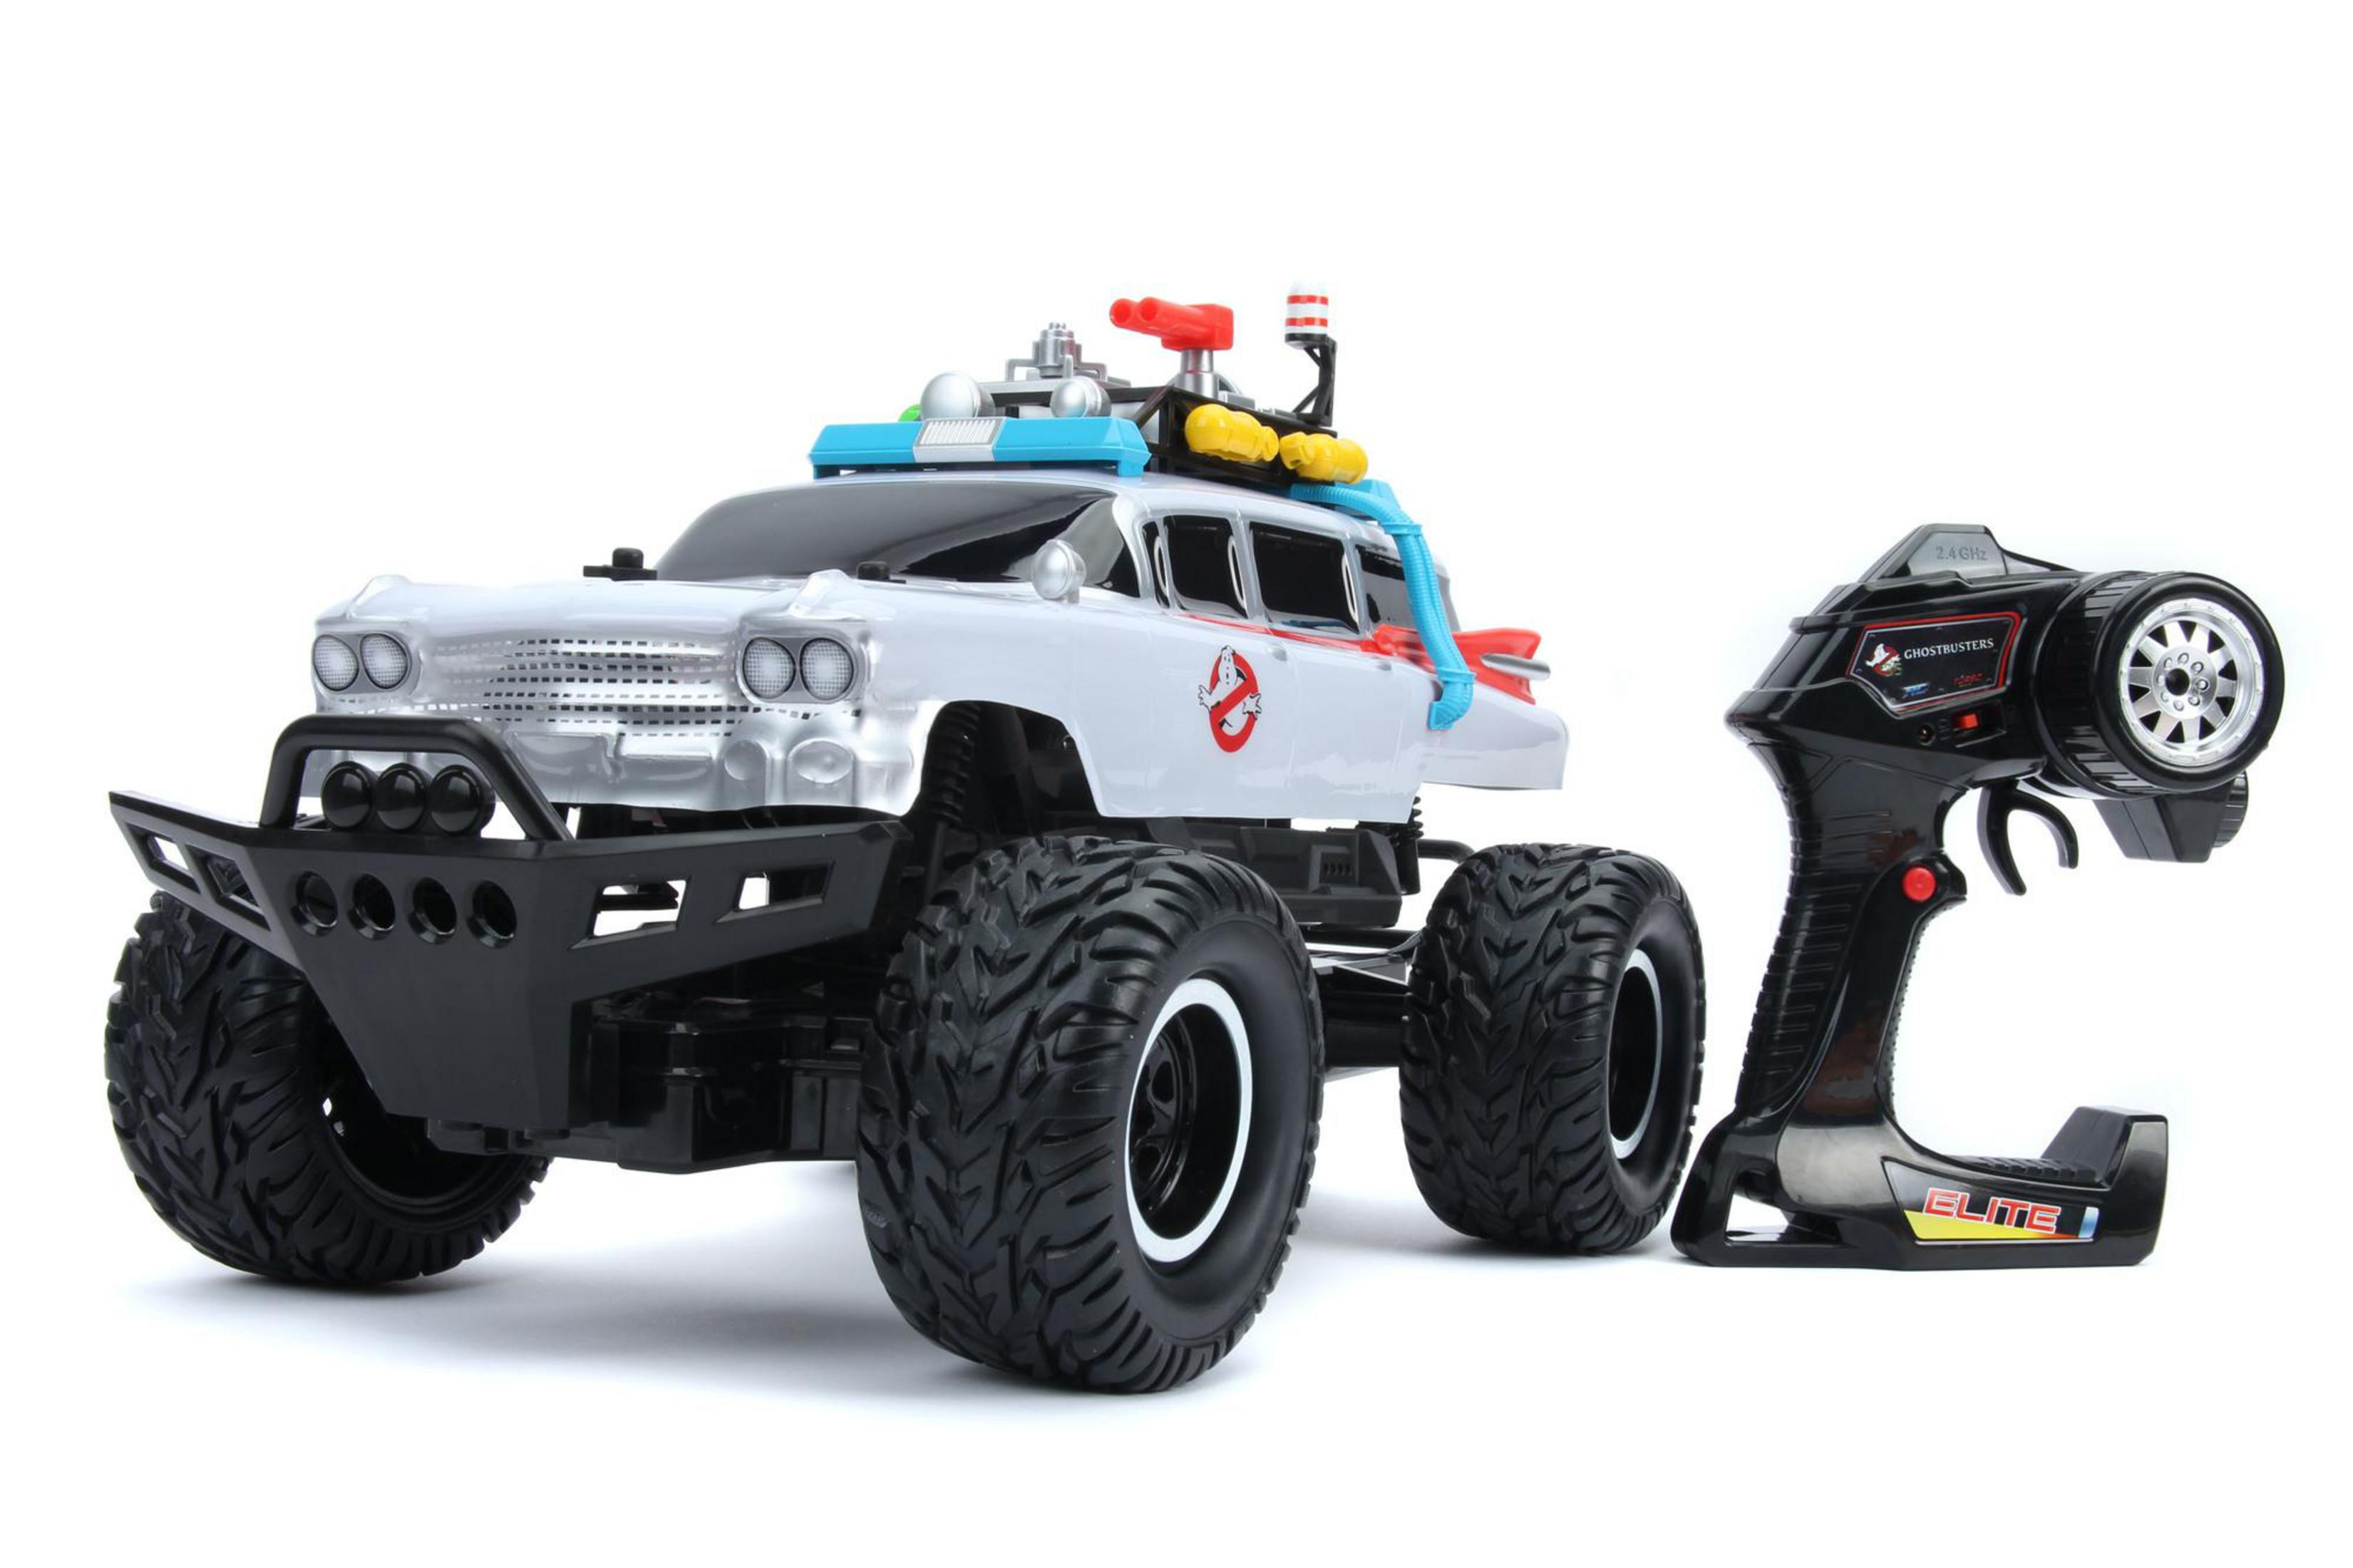 OFFROAD 253239000 Spielzeugauto, R/C RC Mehrfarbig DICKIE GHOSTBUSTERS TOYS